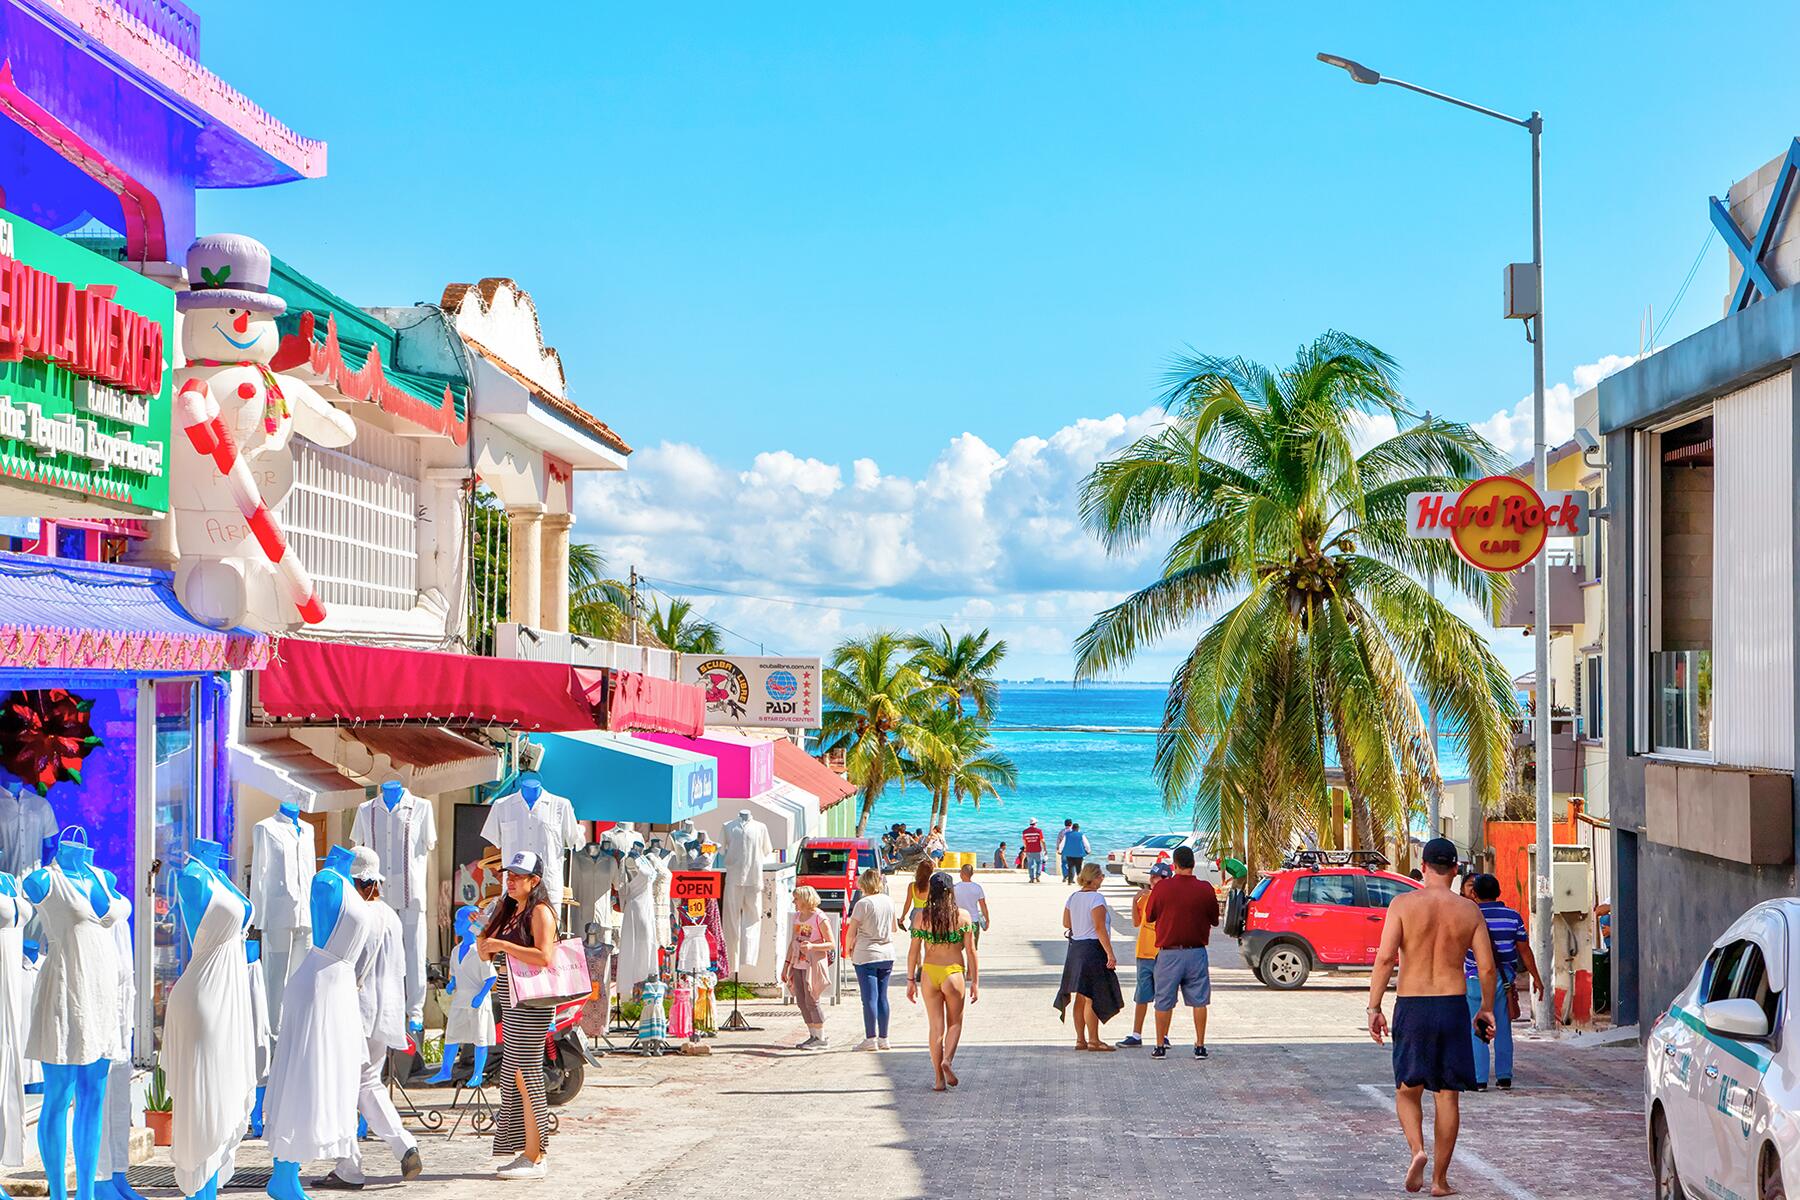 <a href='https://www.fodors.com/world/mexico-and-central-america/mexico/the-riviera-maya/places/tulum/experiences/news/photos/ultimate-things-to-do-in-tulum-mexico#'>From &quot;28 Ultimate Things to Do in Tulum: Day Trip to Playa del Carmen&quot;</a>